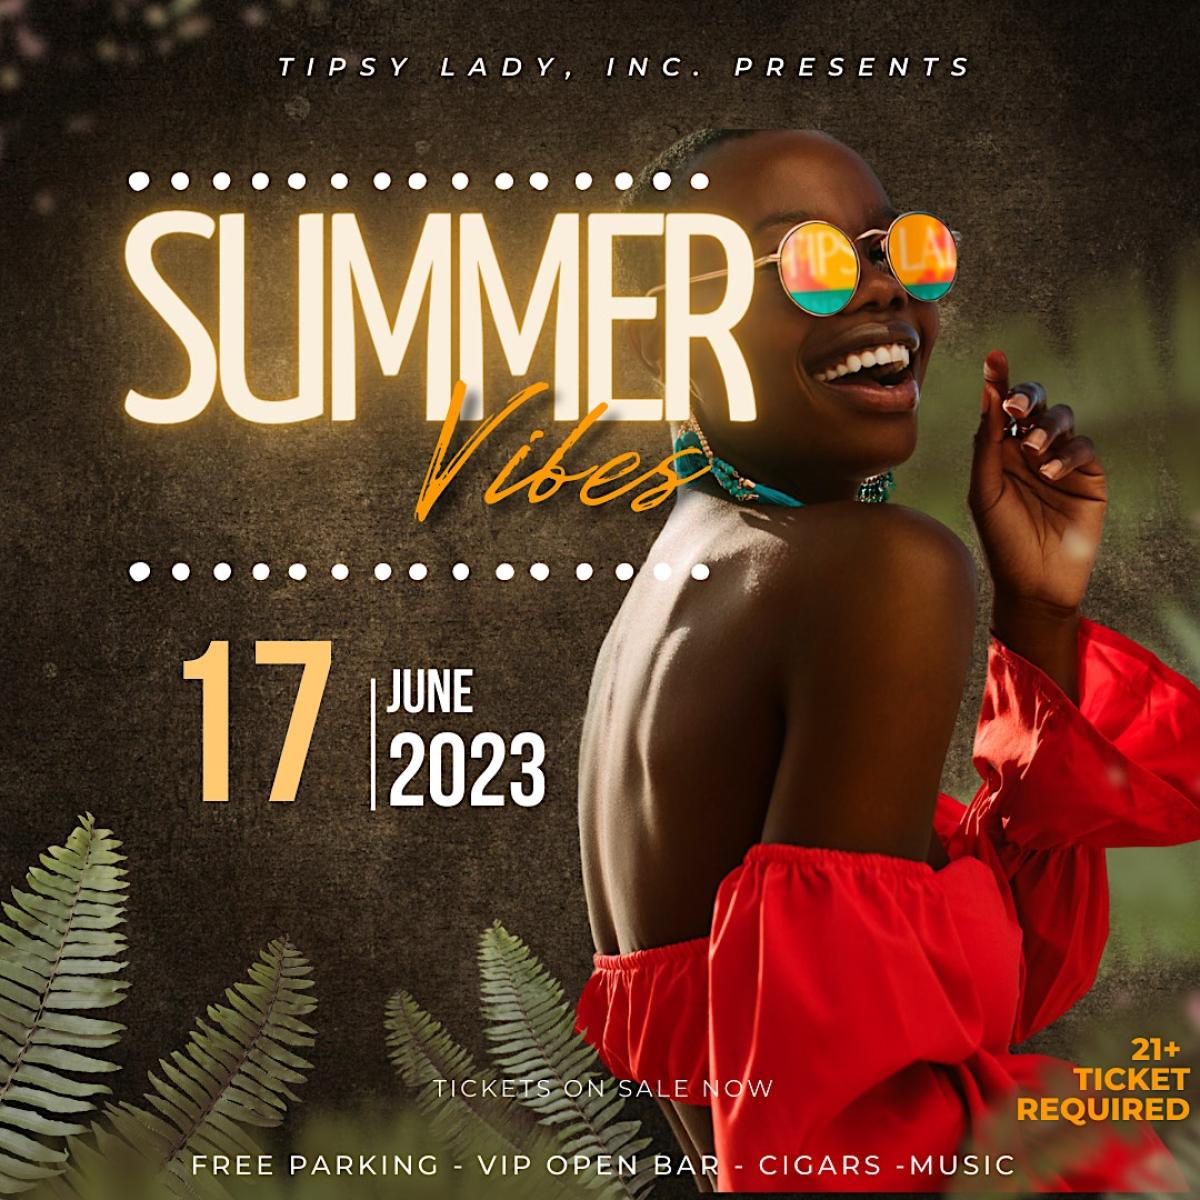 Summer Vibes  flyer or graphic.